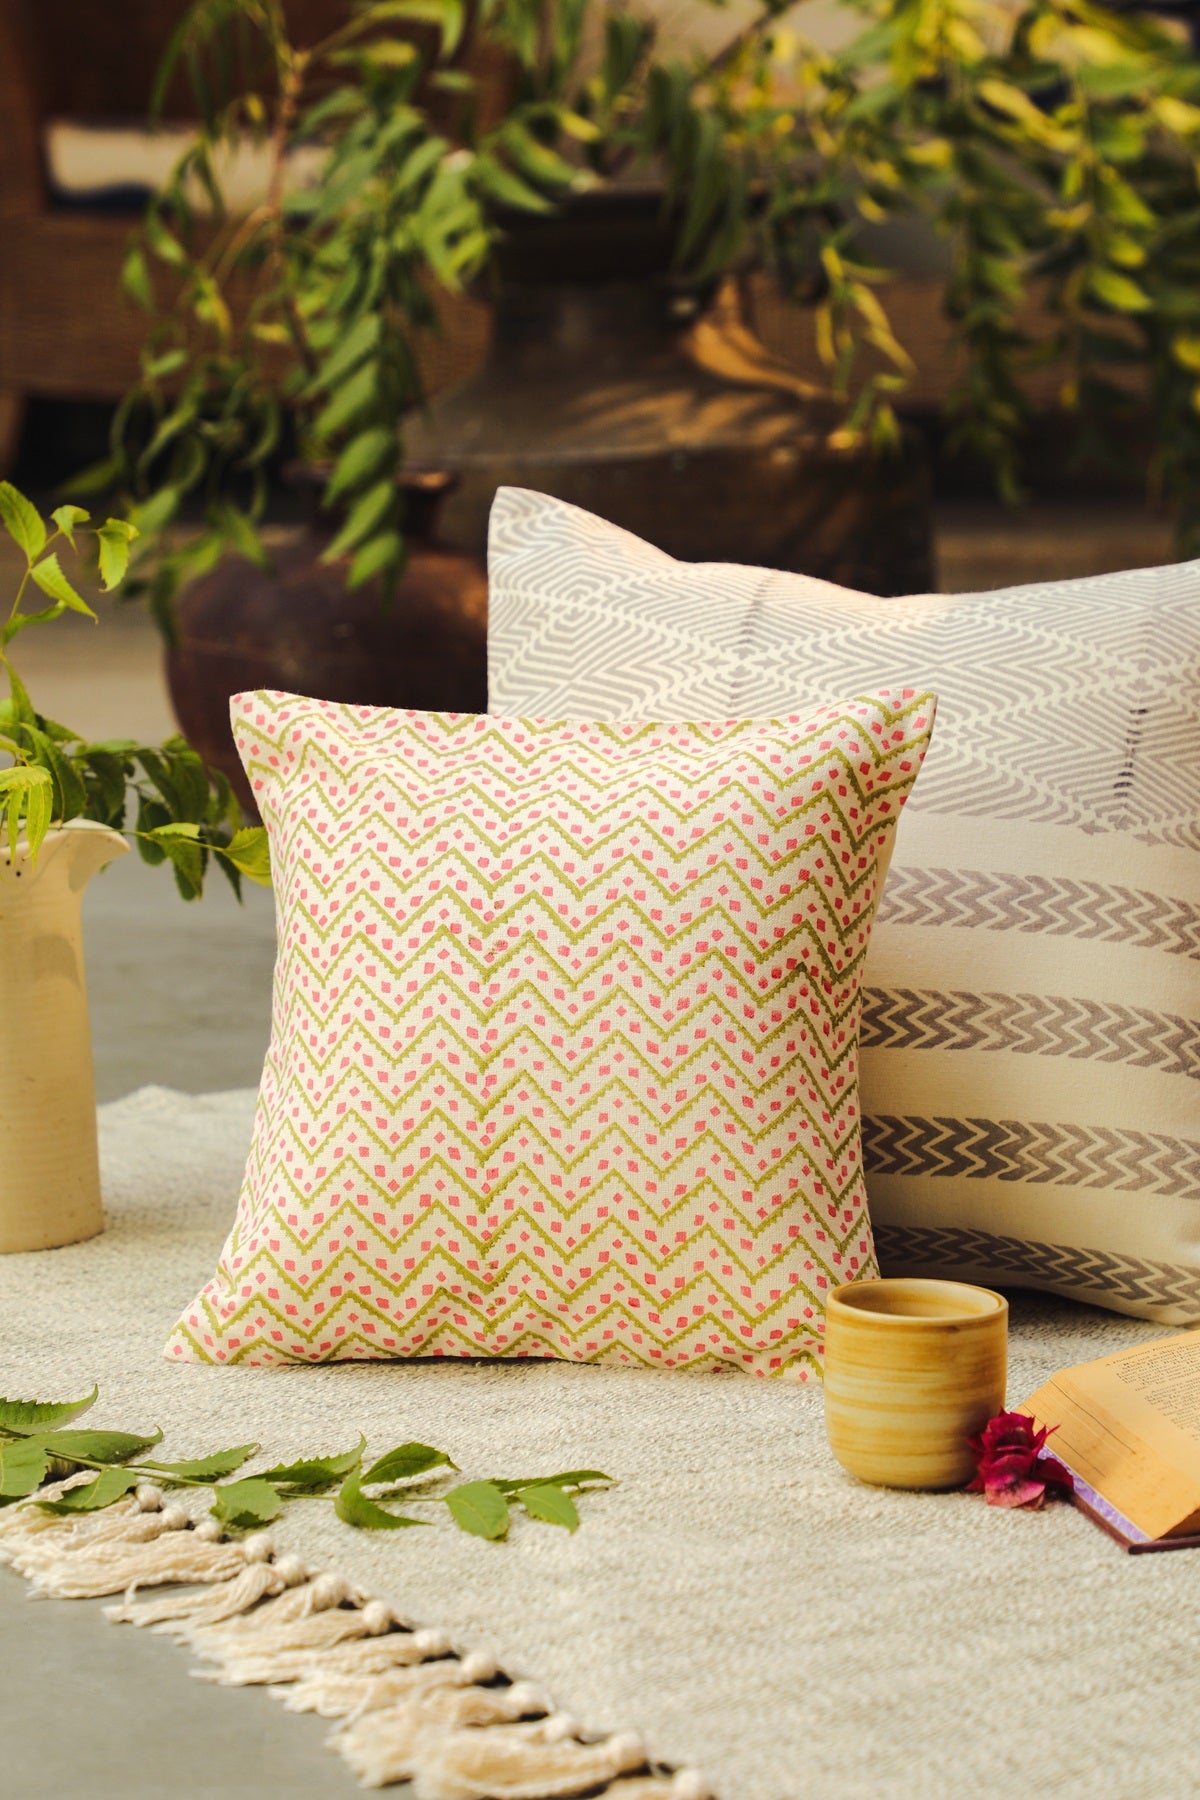 Aaira Pink Cushion Cover With Chevron And Dot Patterns